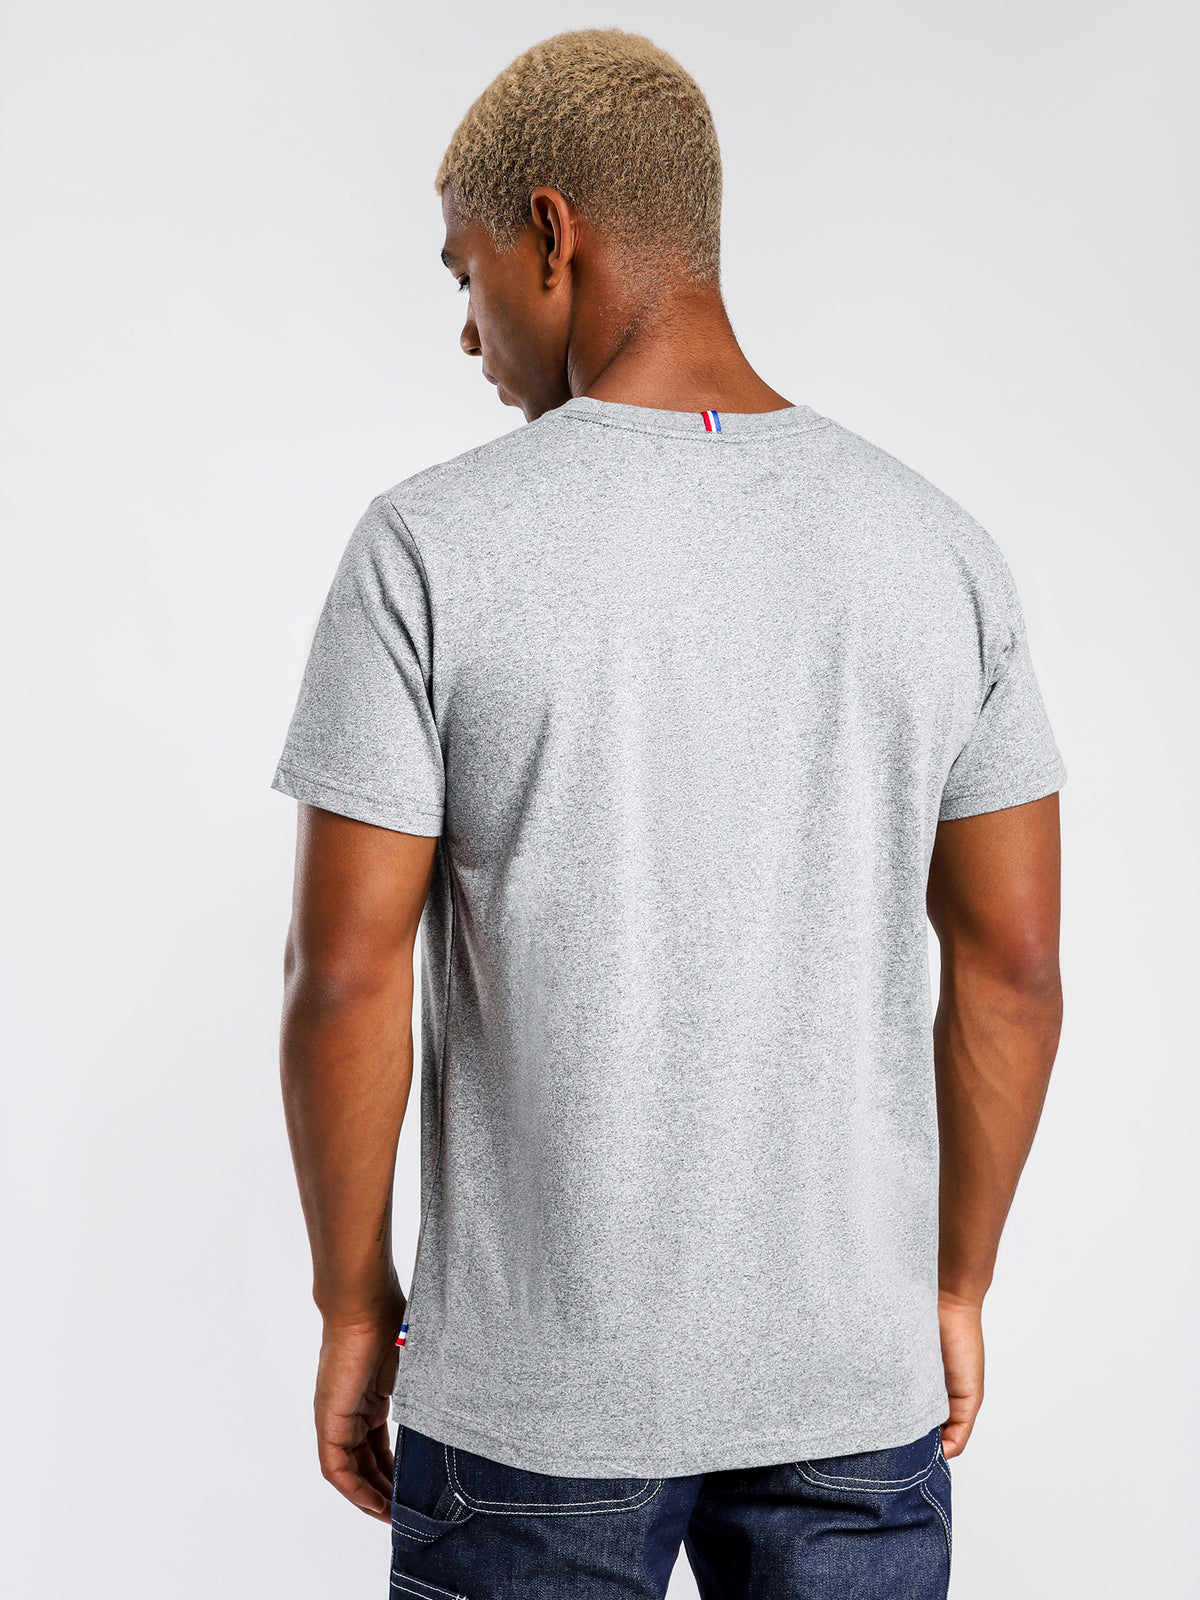 Labrit T-Shirt in Charcoal Marle